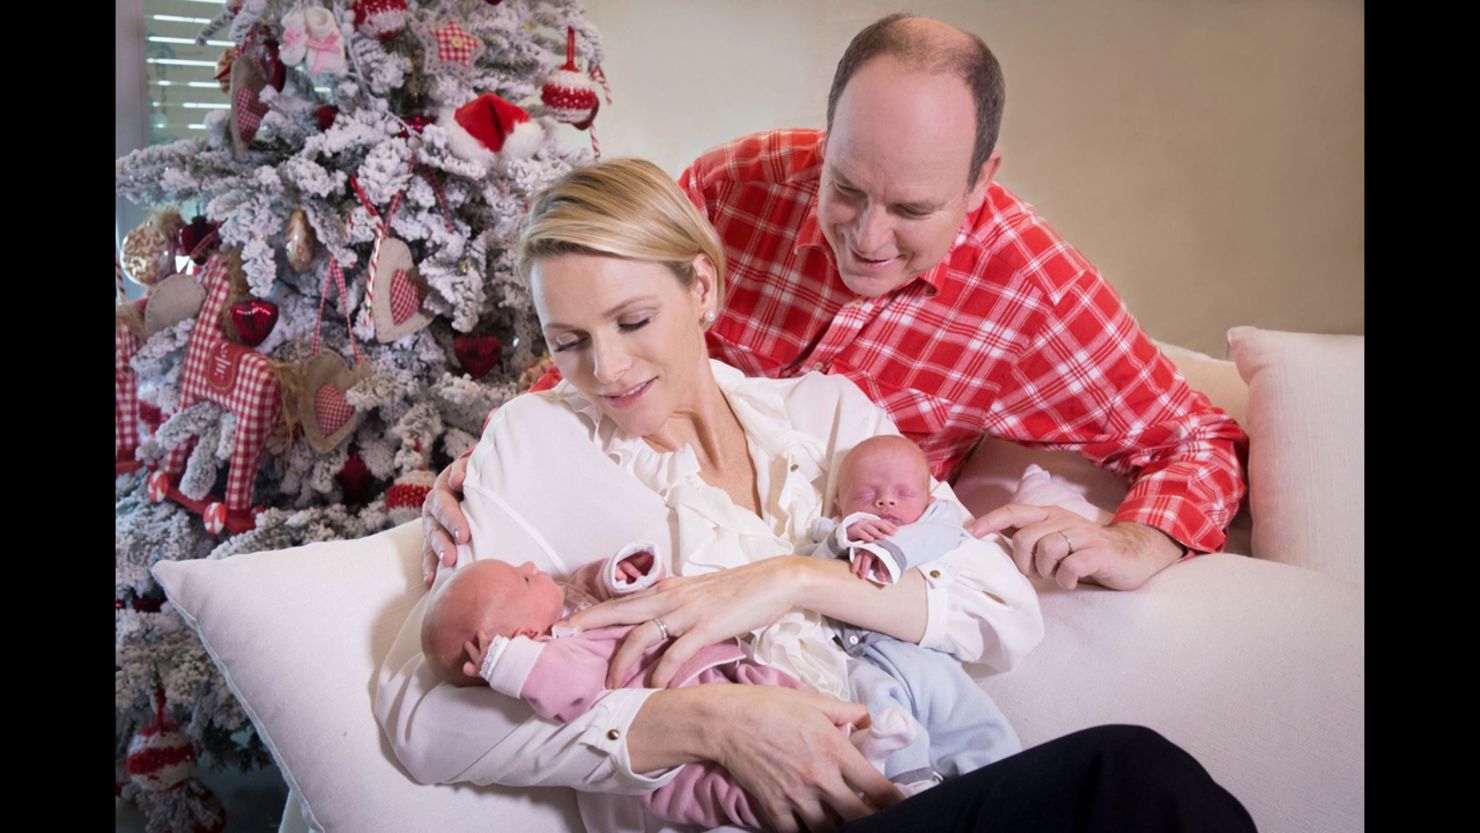 Prince Albert II and Princess Charlene released the first photos of the twins on 23 December.